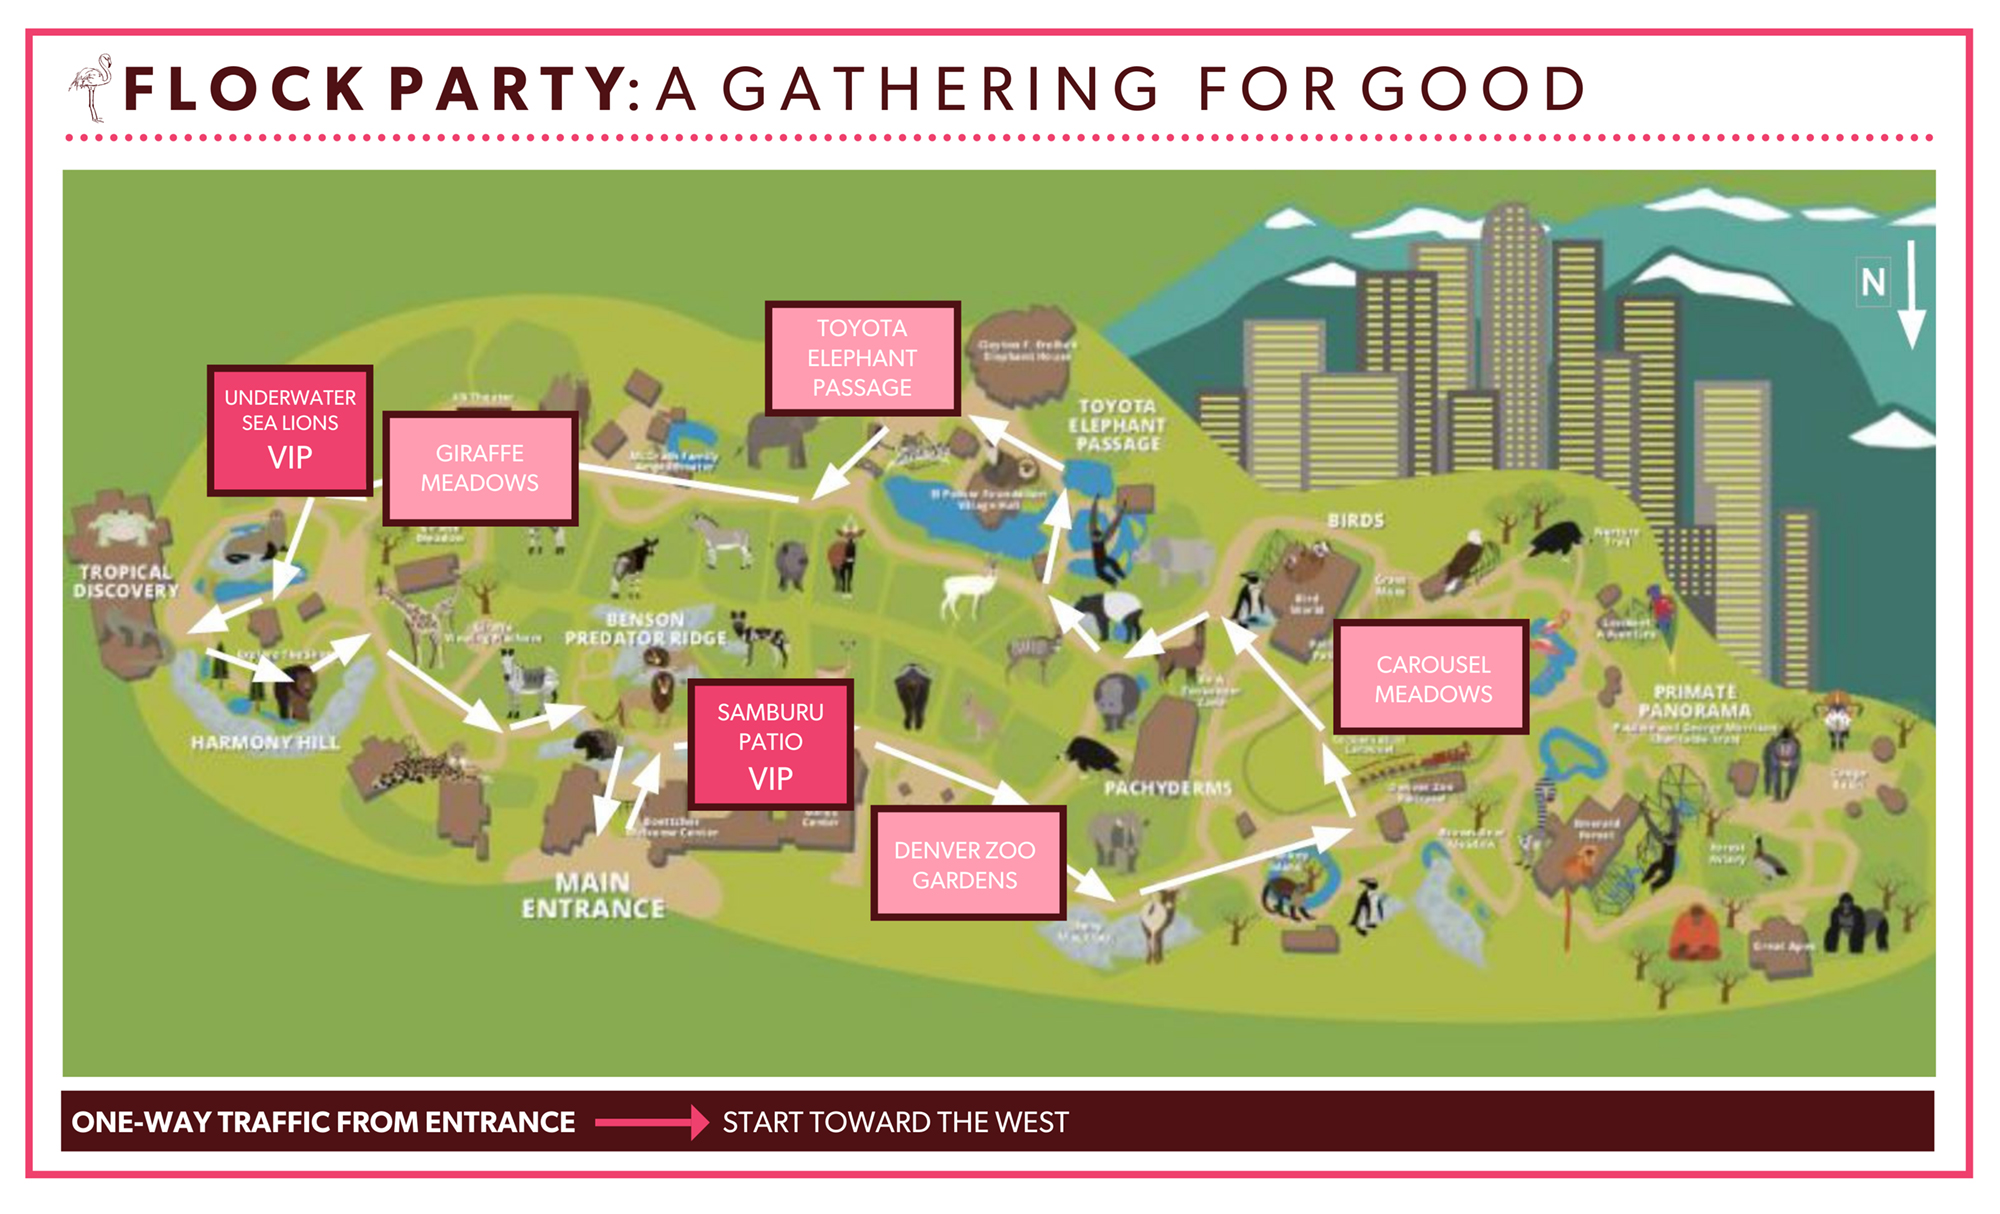 Flock Party Event Map